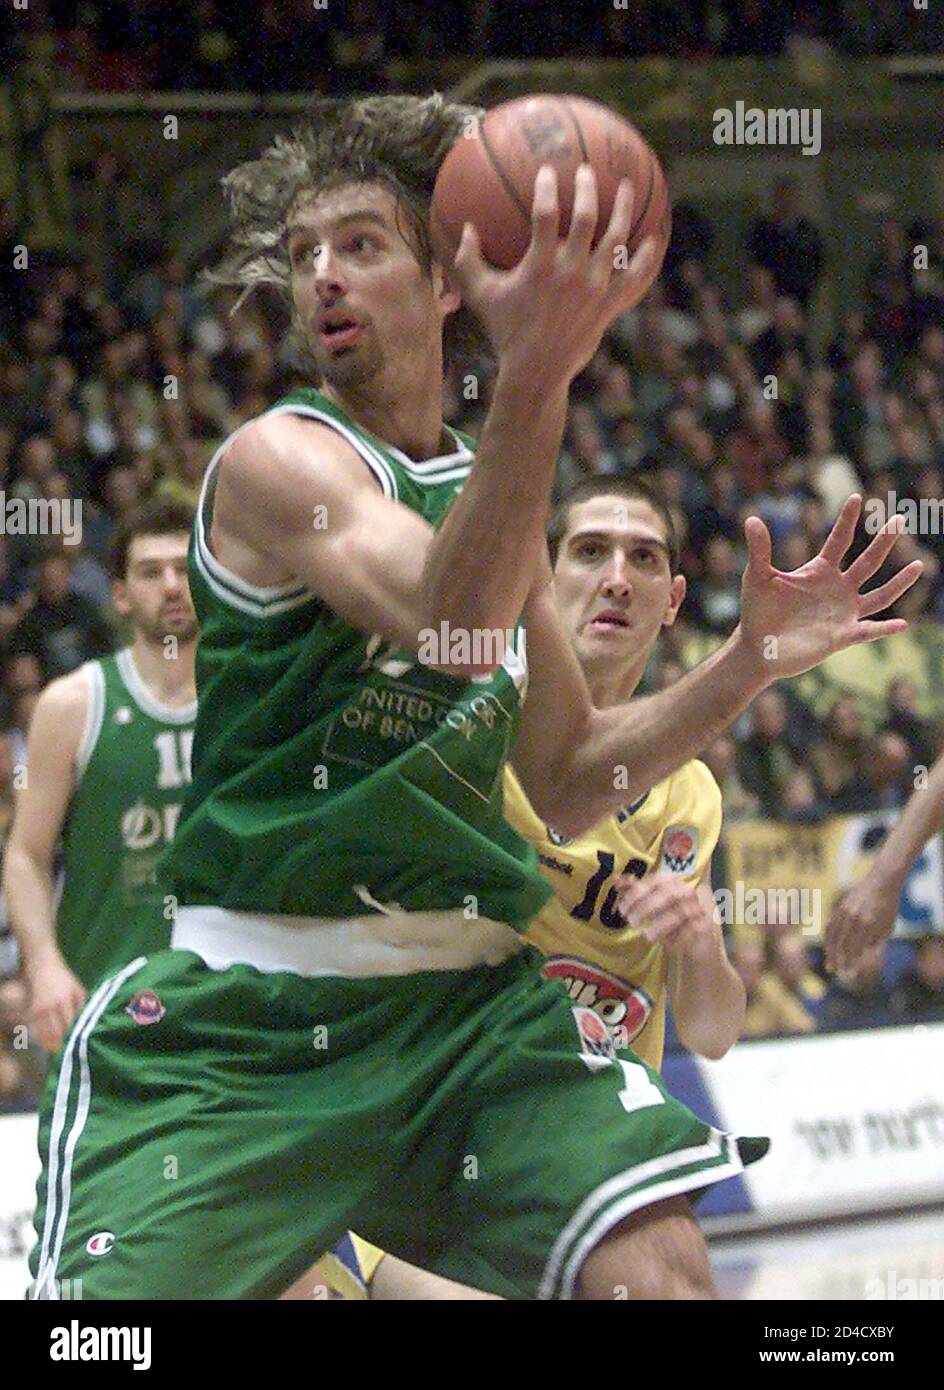 Denis Marconato from Benetton Treviso looks to pass in front of Tal  Burstein (R) from Maccabi Tel Aviv in Tel Aviv January 31, 2002. The match  is a Euroleague Group A match.